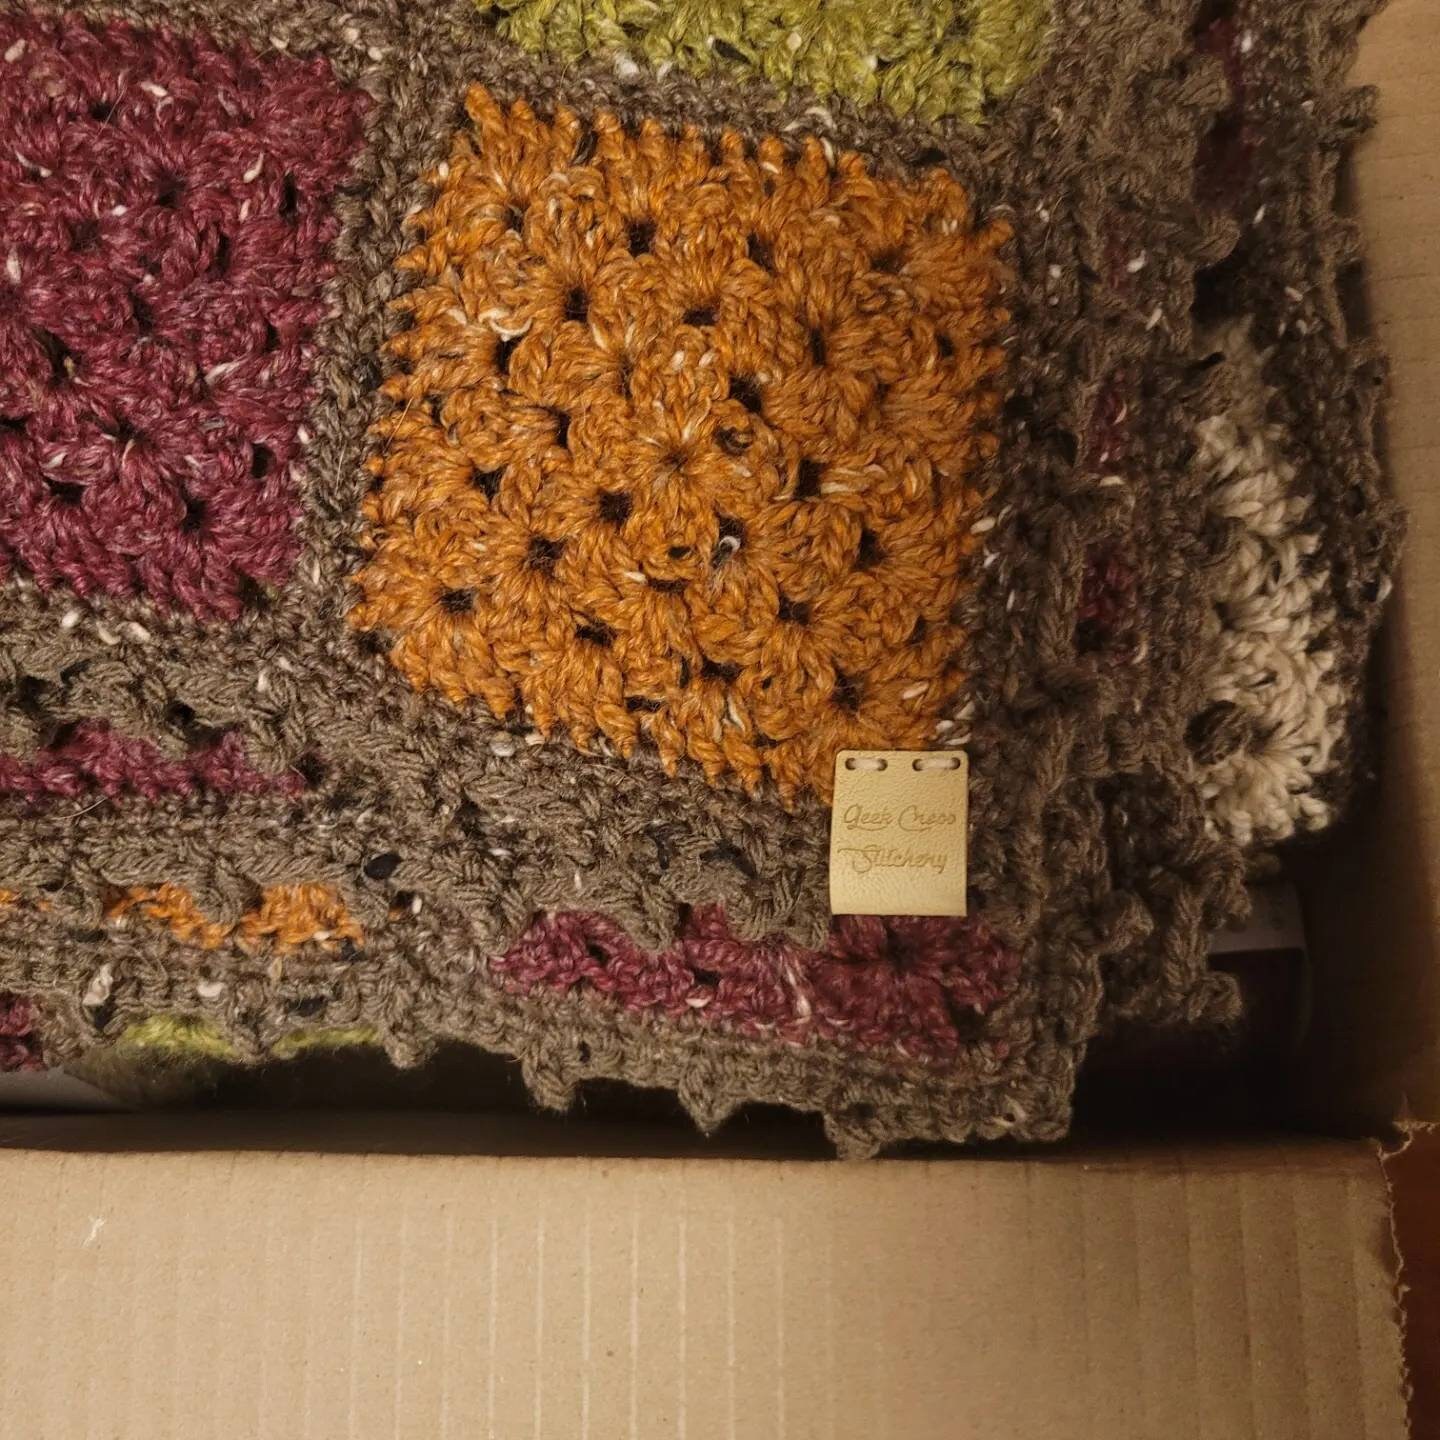 FO] And its finally finished and I am so pleased with it - the burrow  blanket from the Harry Potter Crochet Wizardry book. : r/crochet